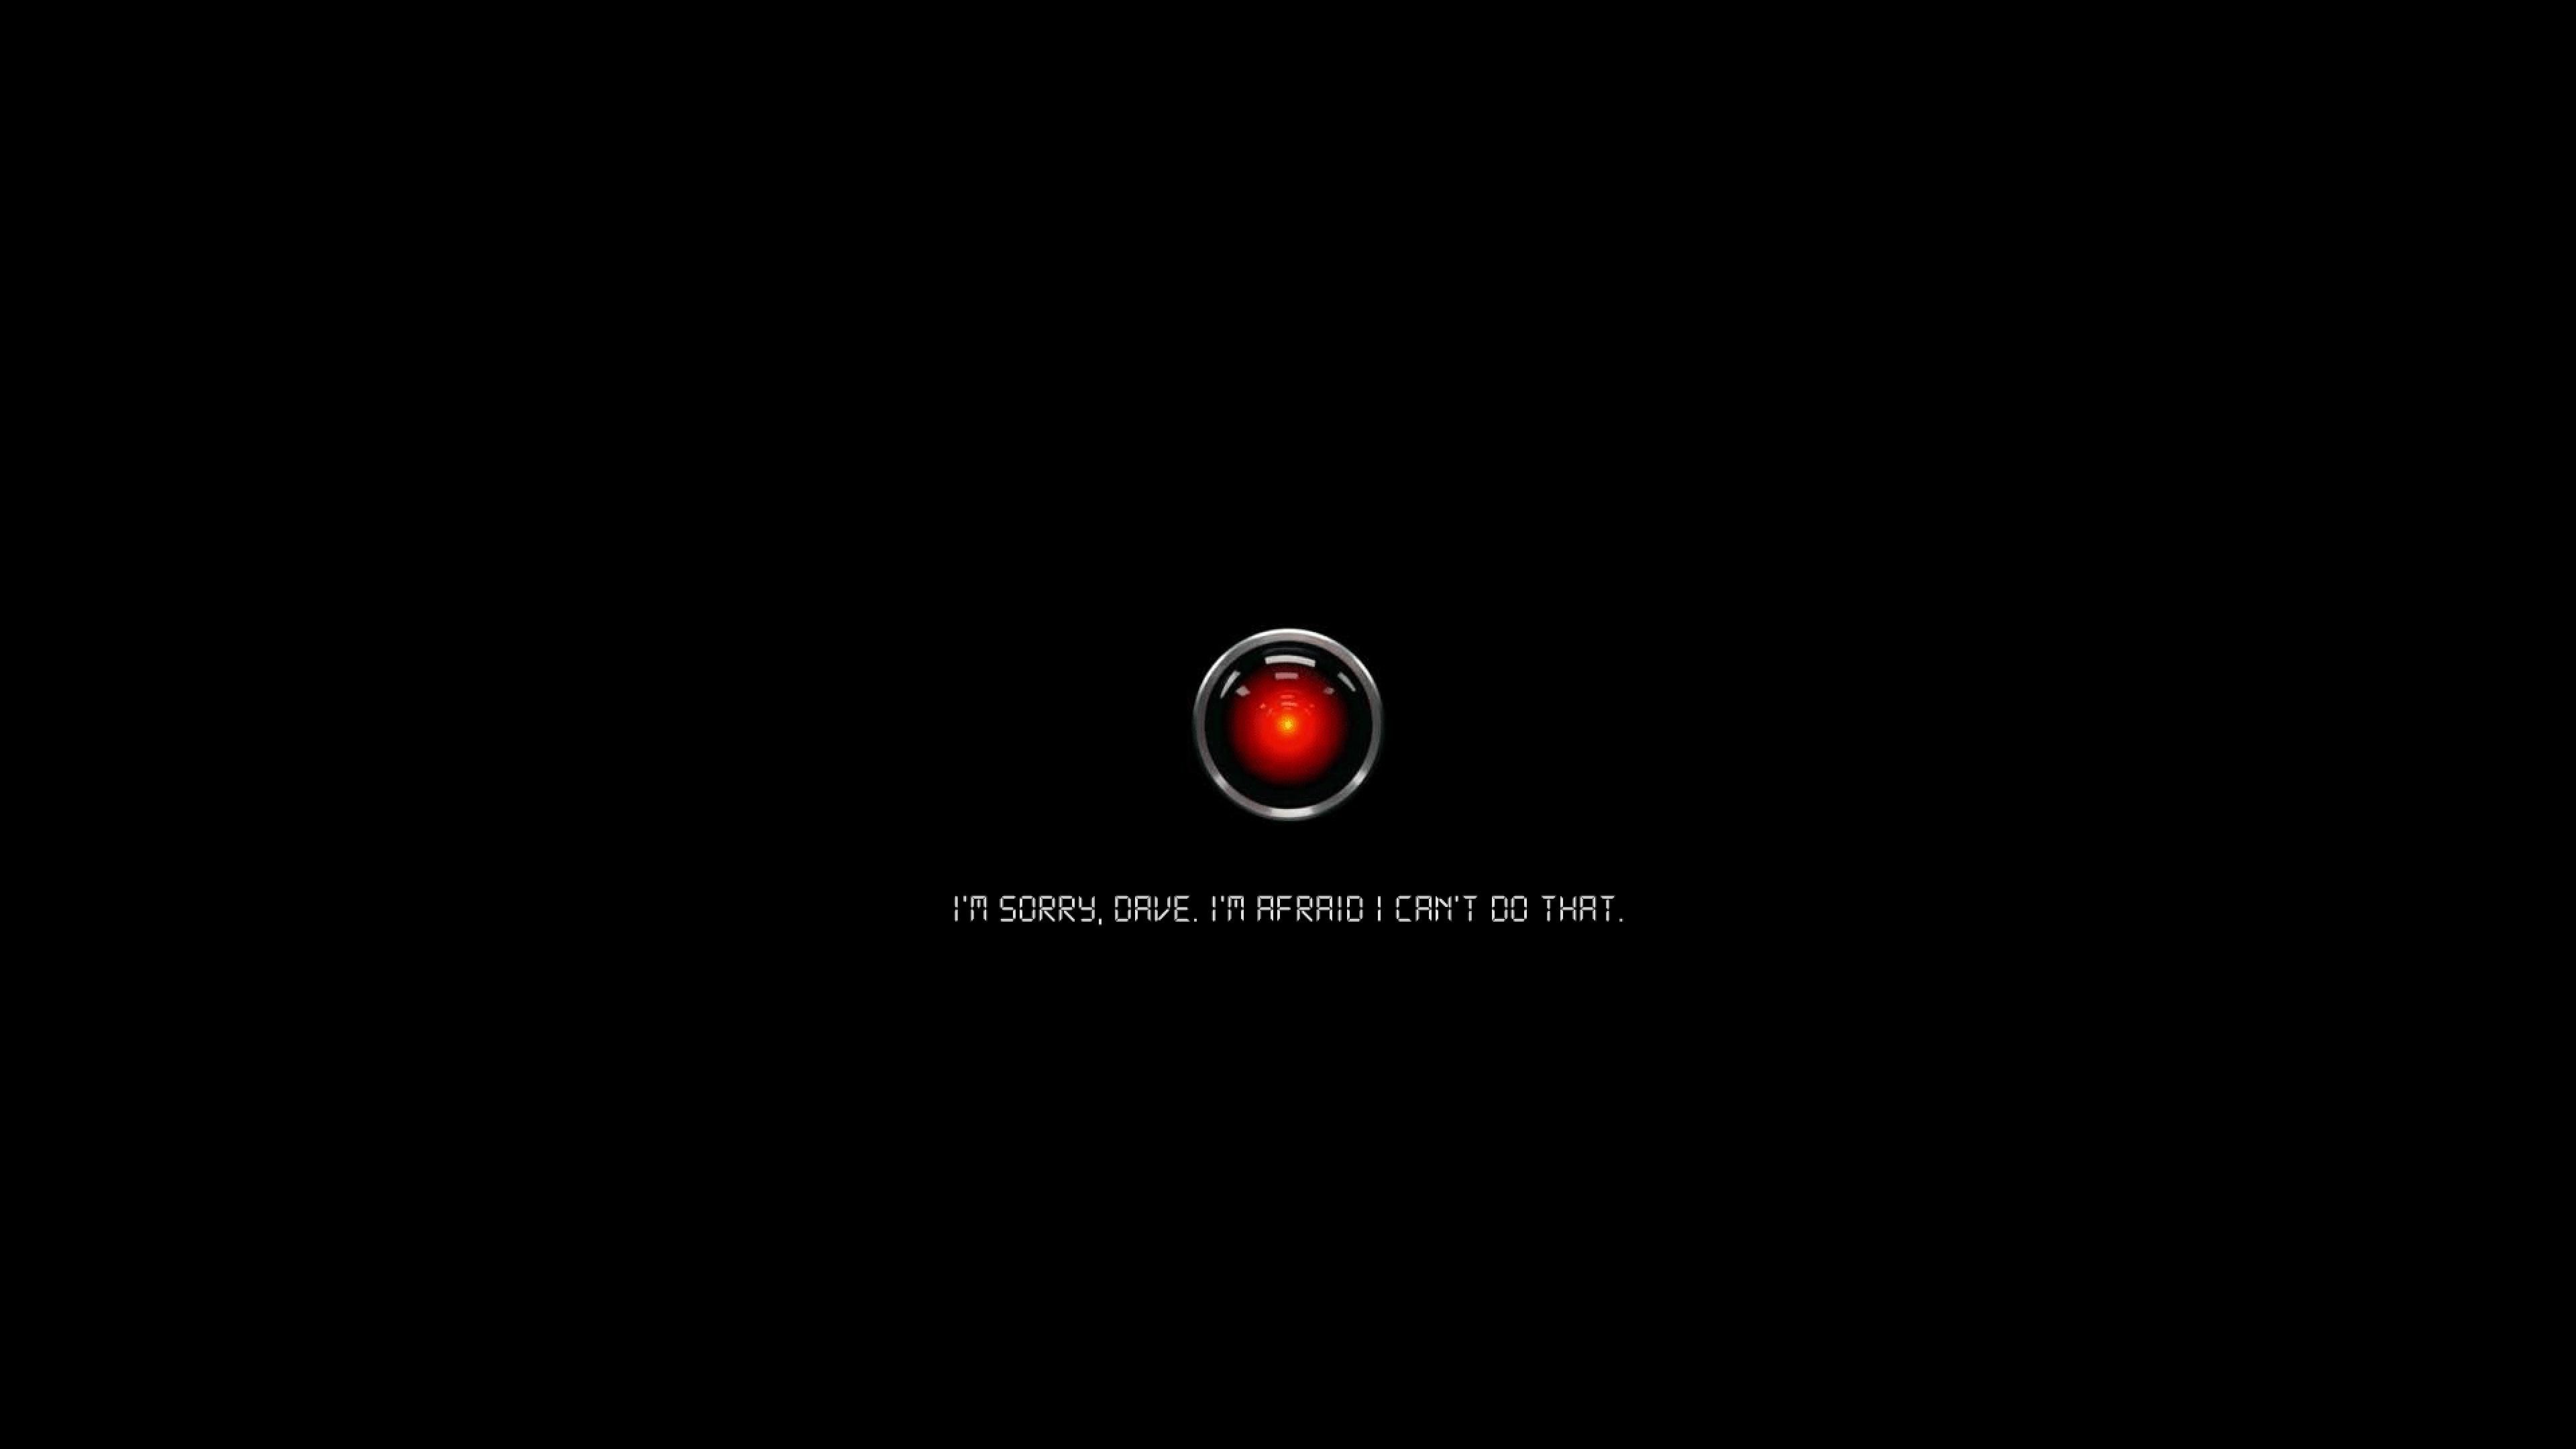 2001 A Space Odyssey Wallpaper